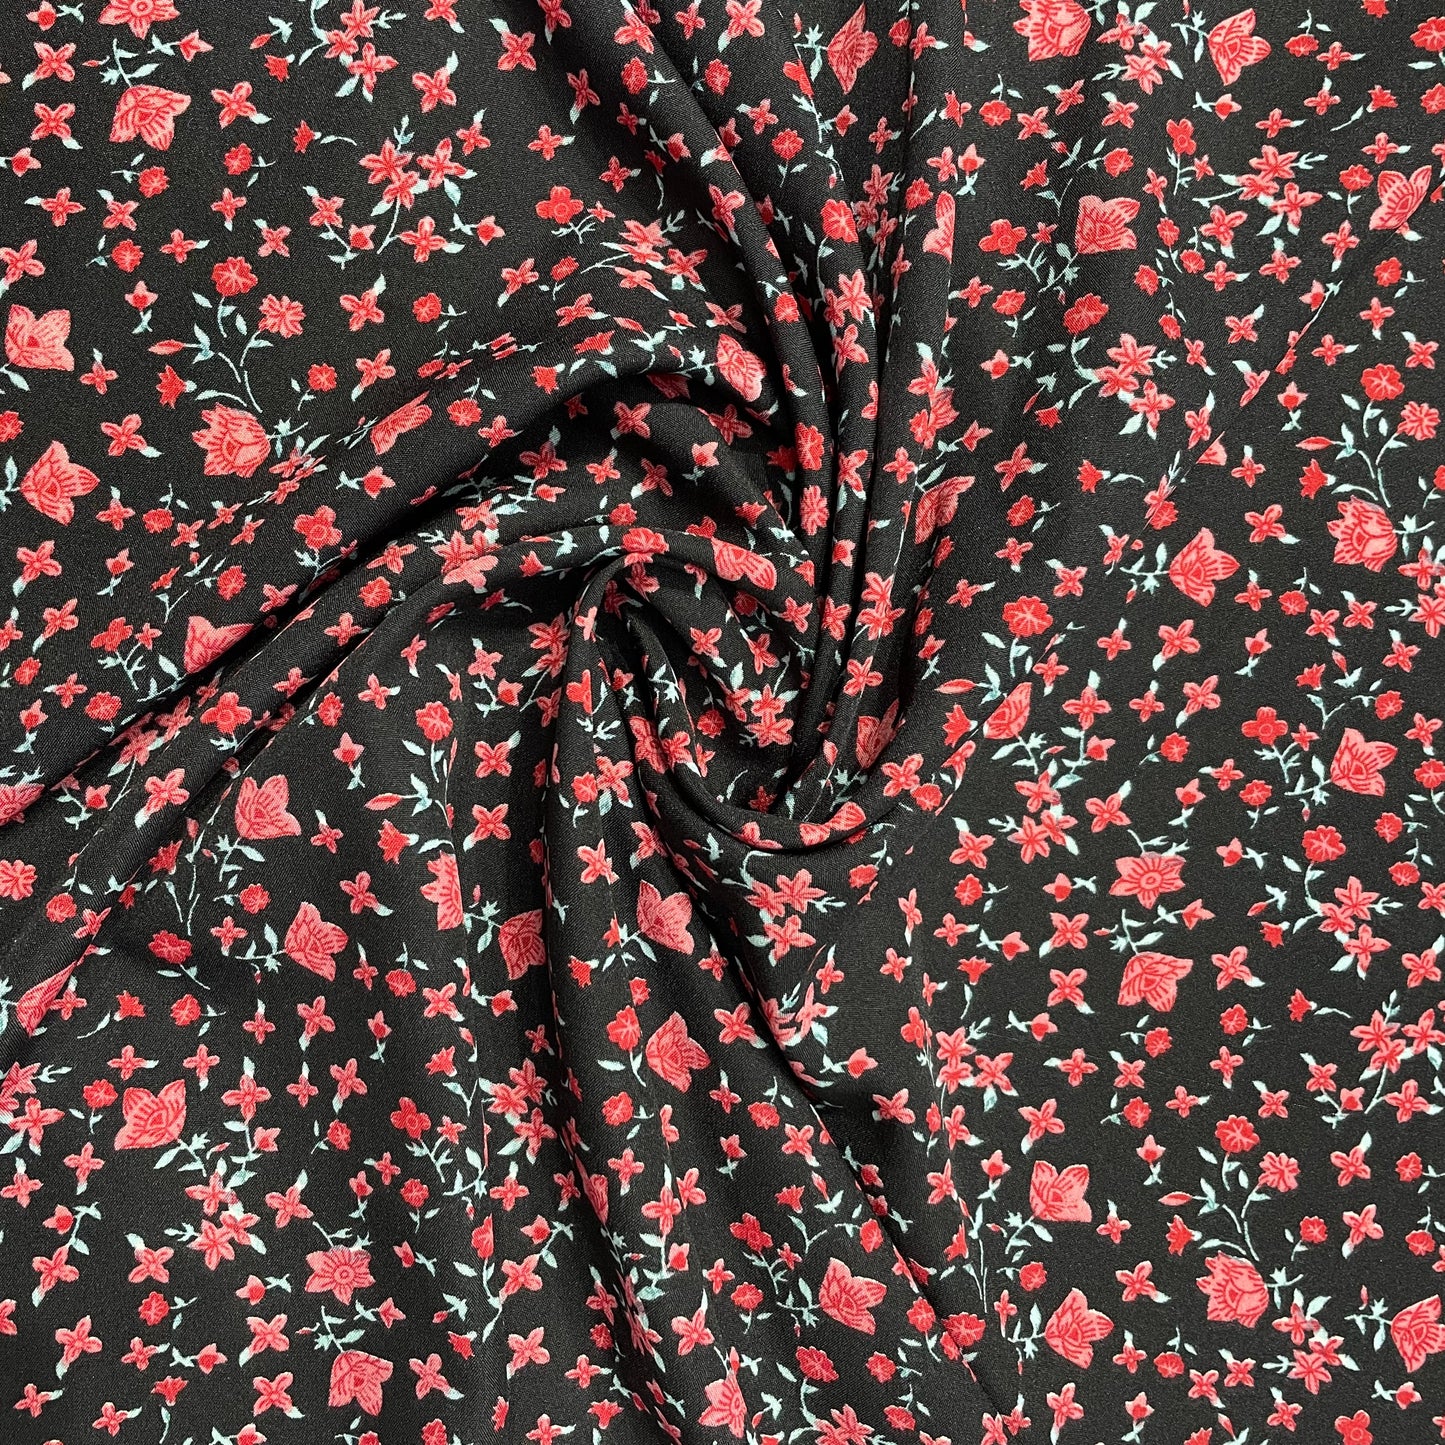 Black With Red Floral Crepe Fabric ,42 inches - TradeUNO